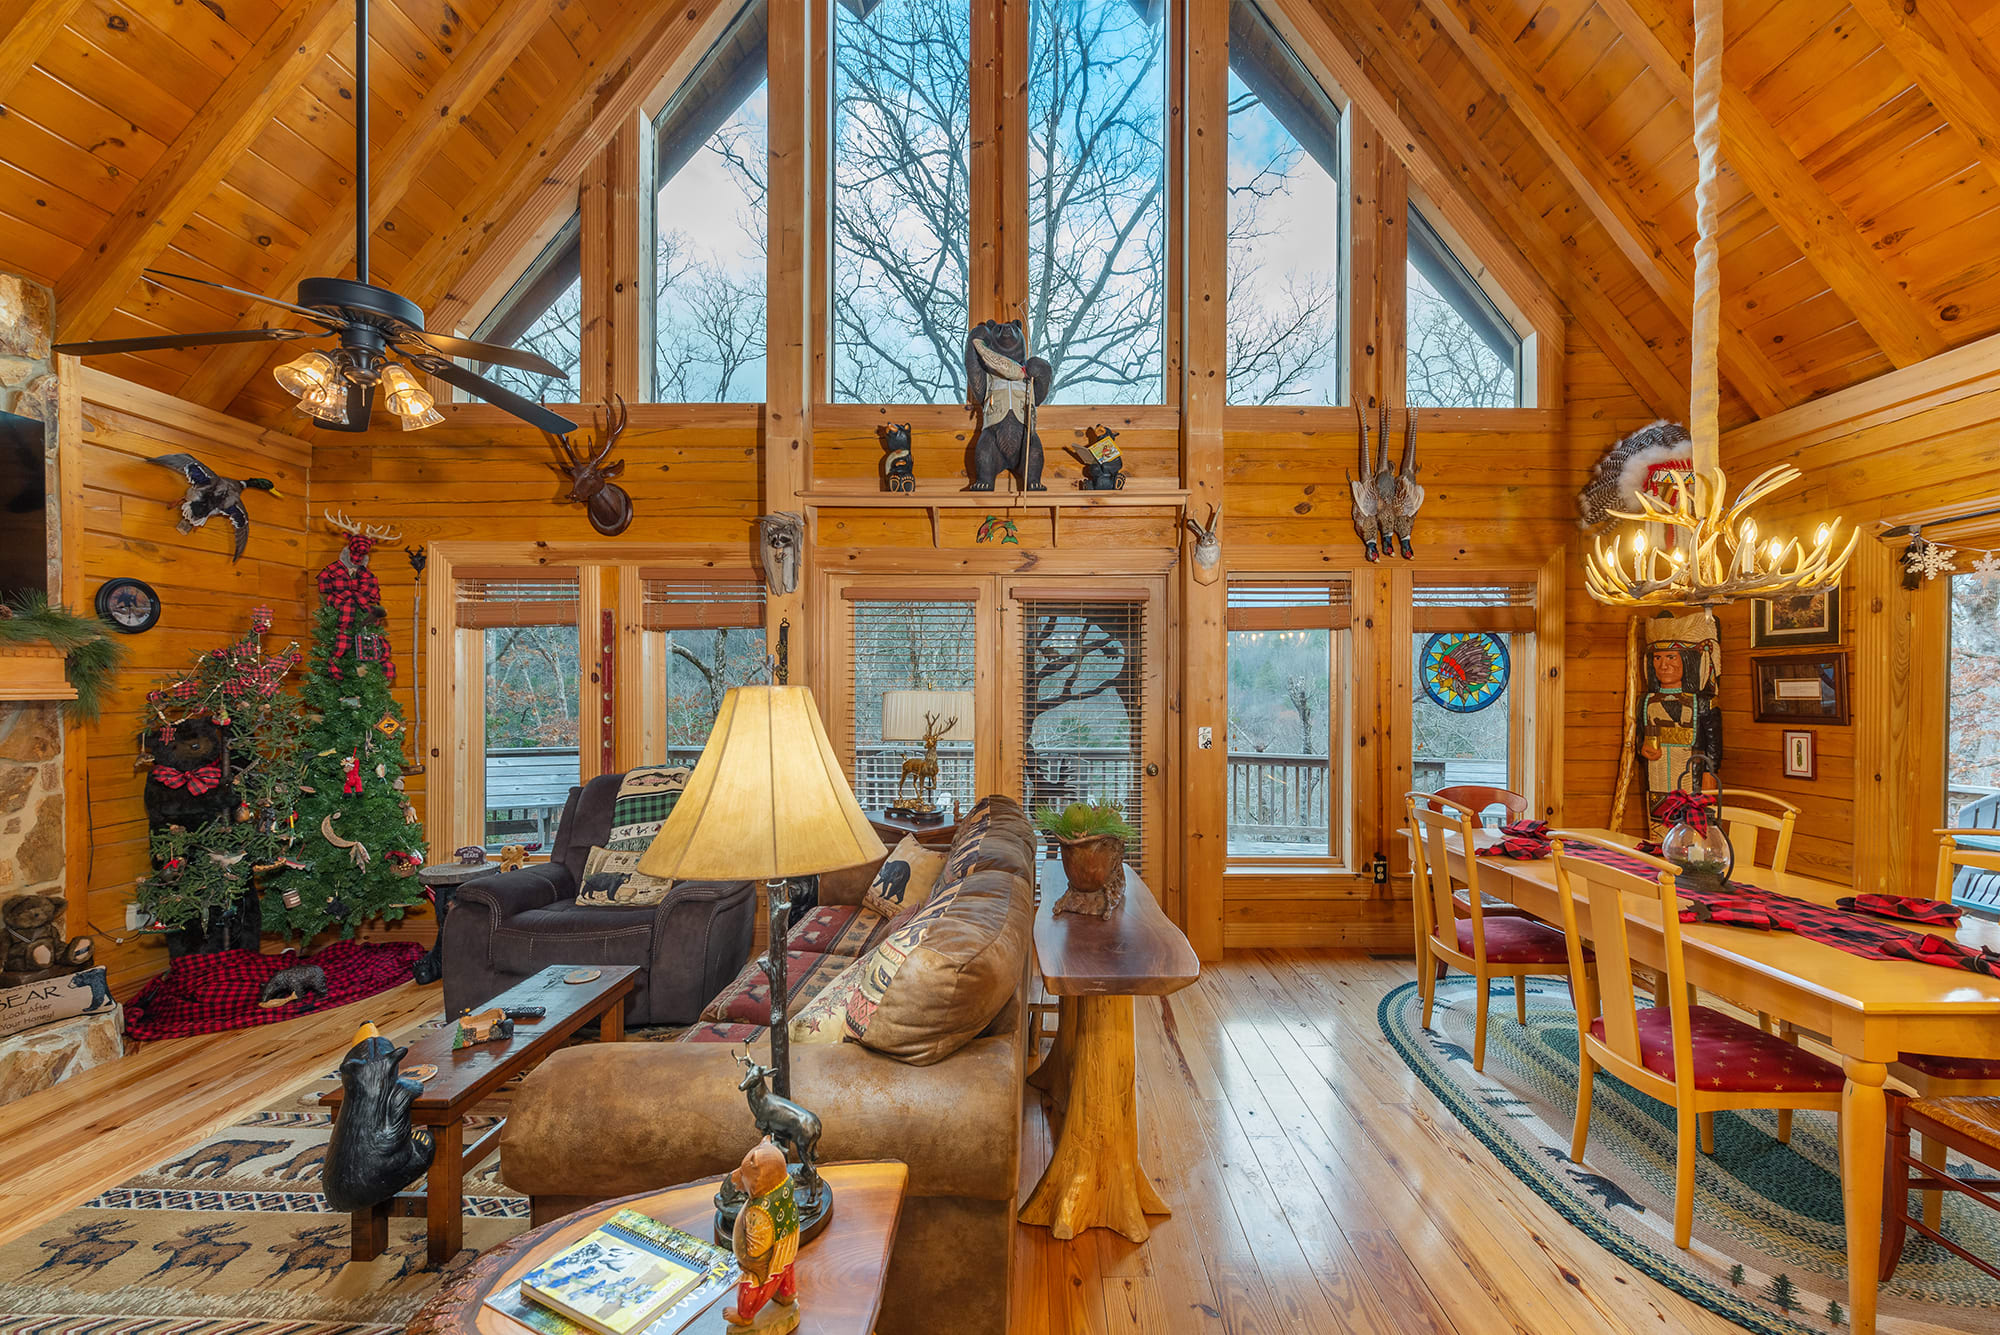 Enjoy our Classic Cabin Vibe with incredible floor to ceiling windows overlooking the mountains.